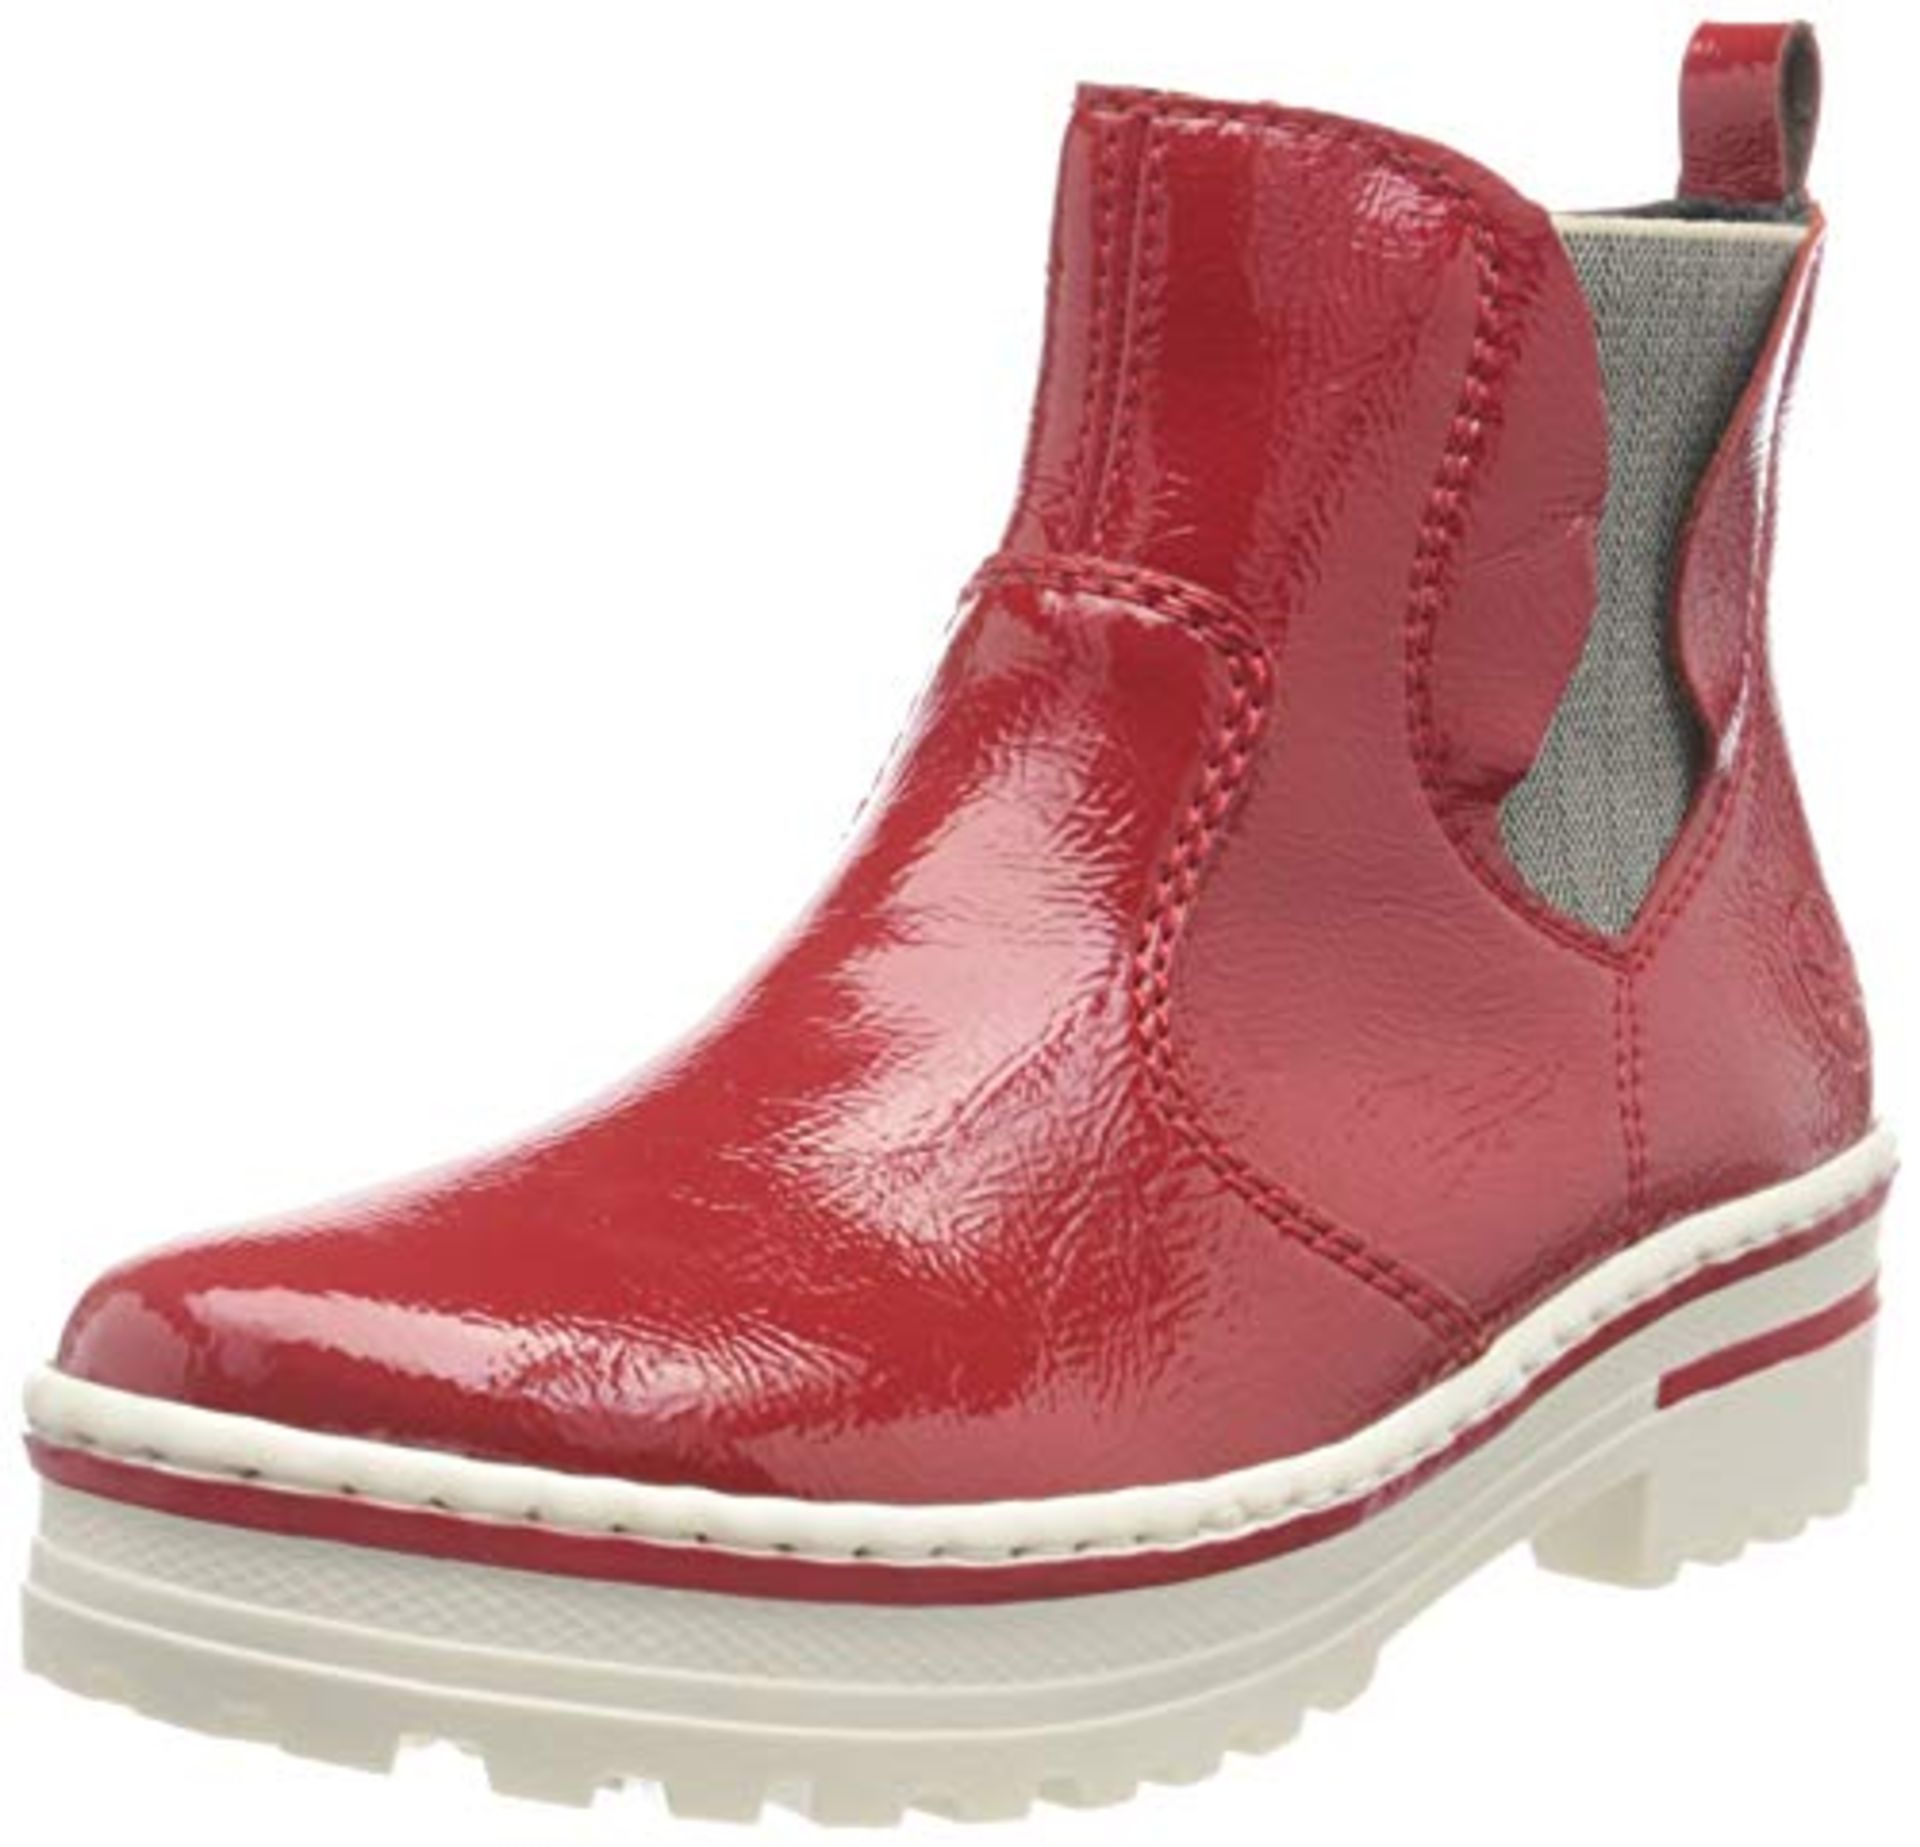 Rieker Women's Z8196 Chelsea Boot, red, 9 UK RRP £45Condition ReportBRAND NEW BOXED